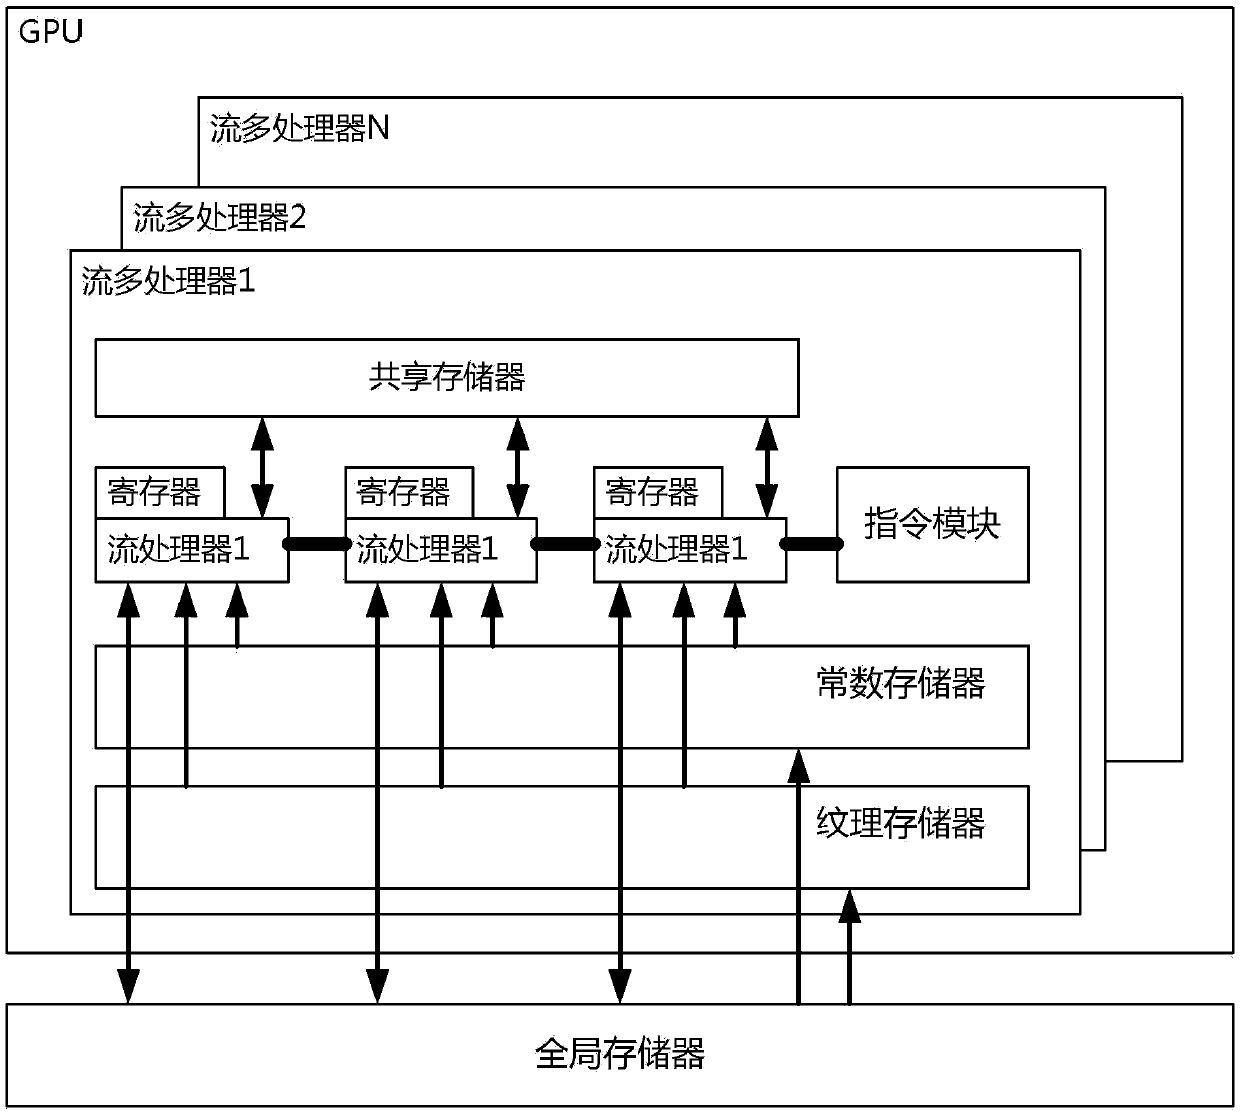 Accelerated decoding method of qc-ldpc code based on gpu architecture